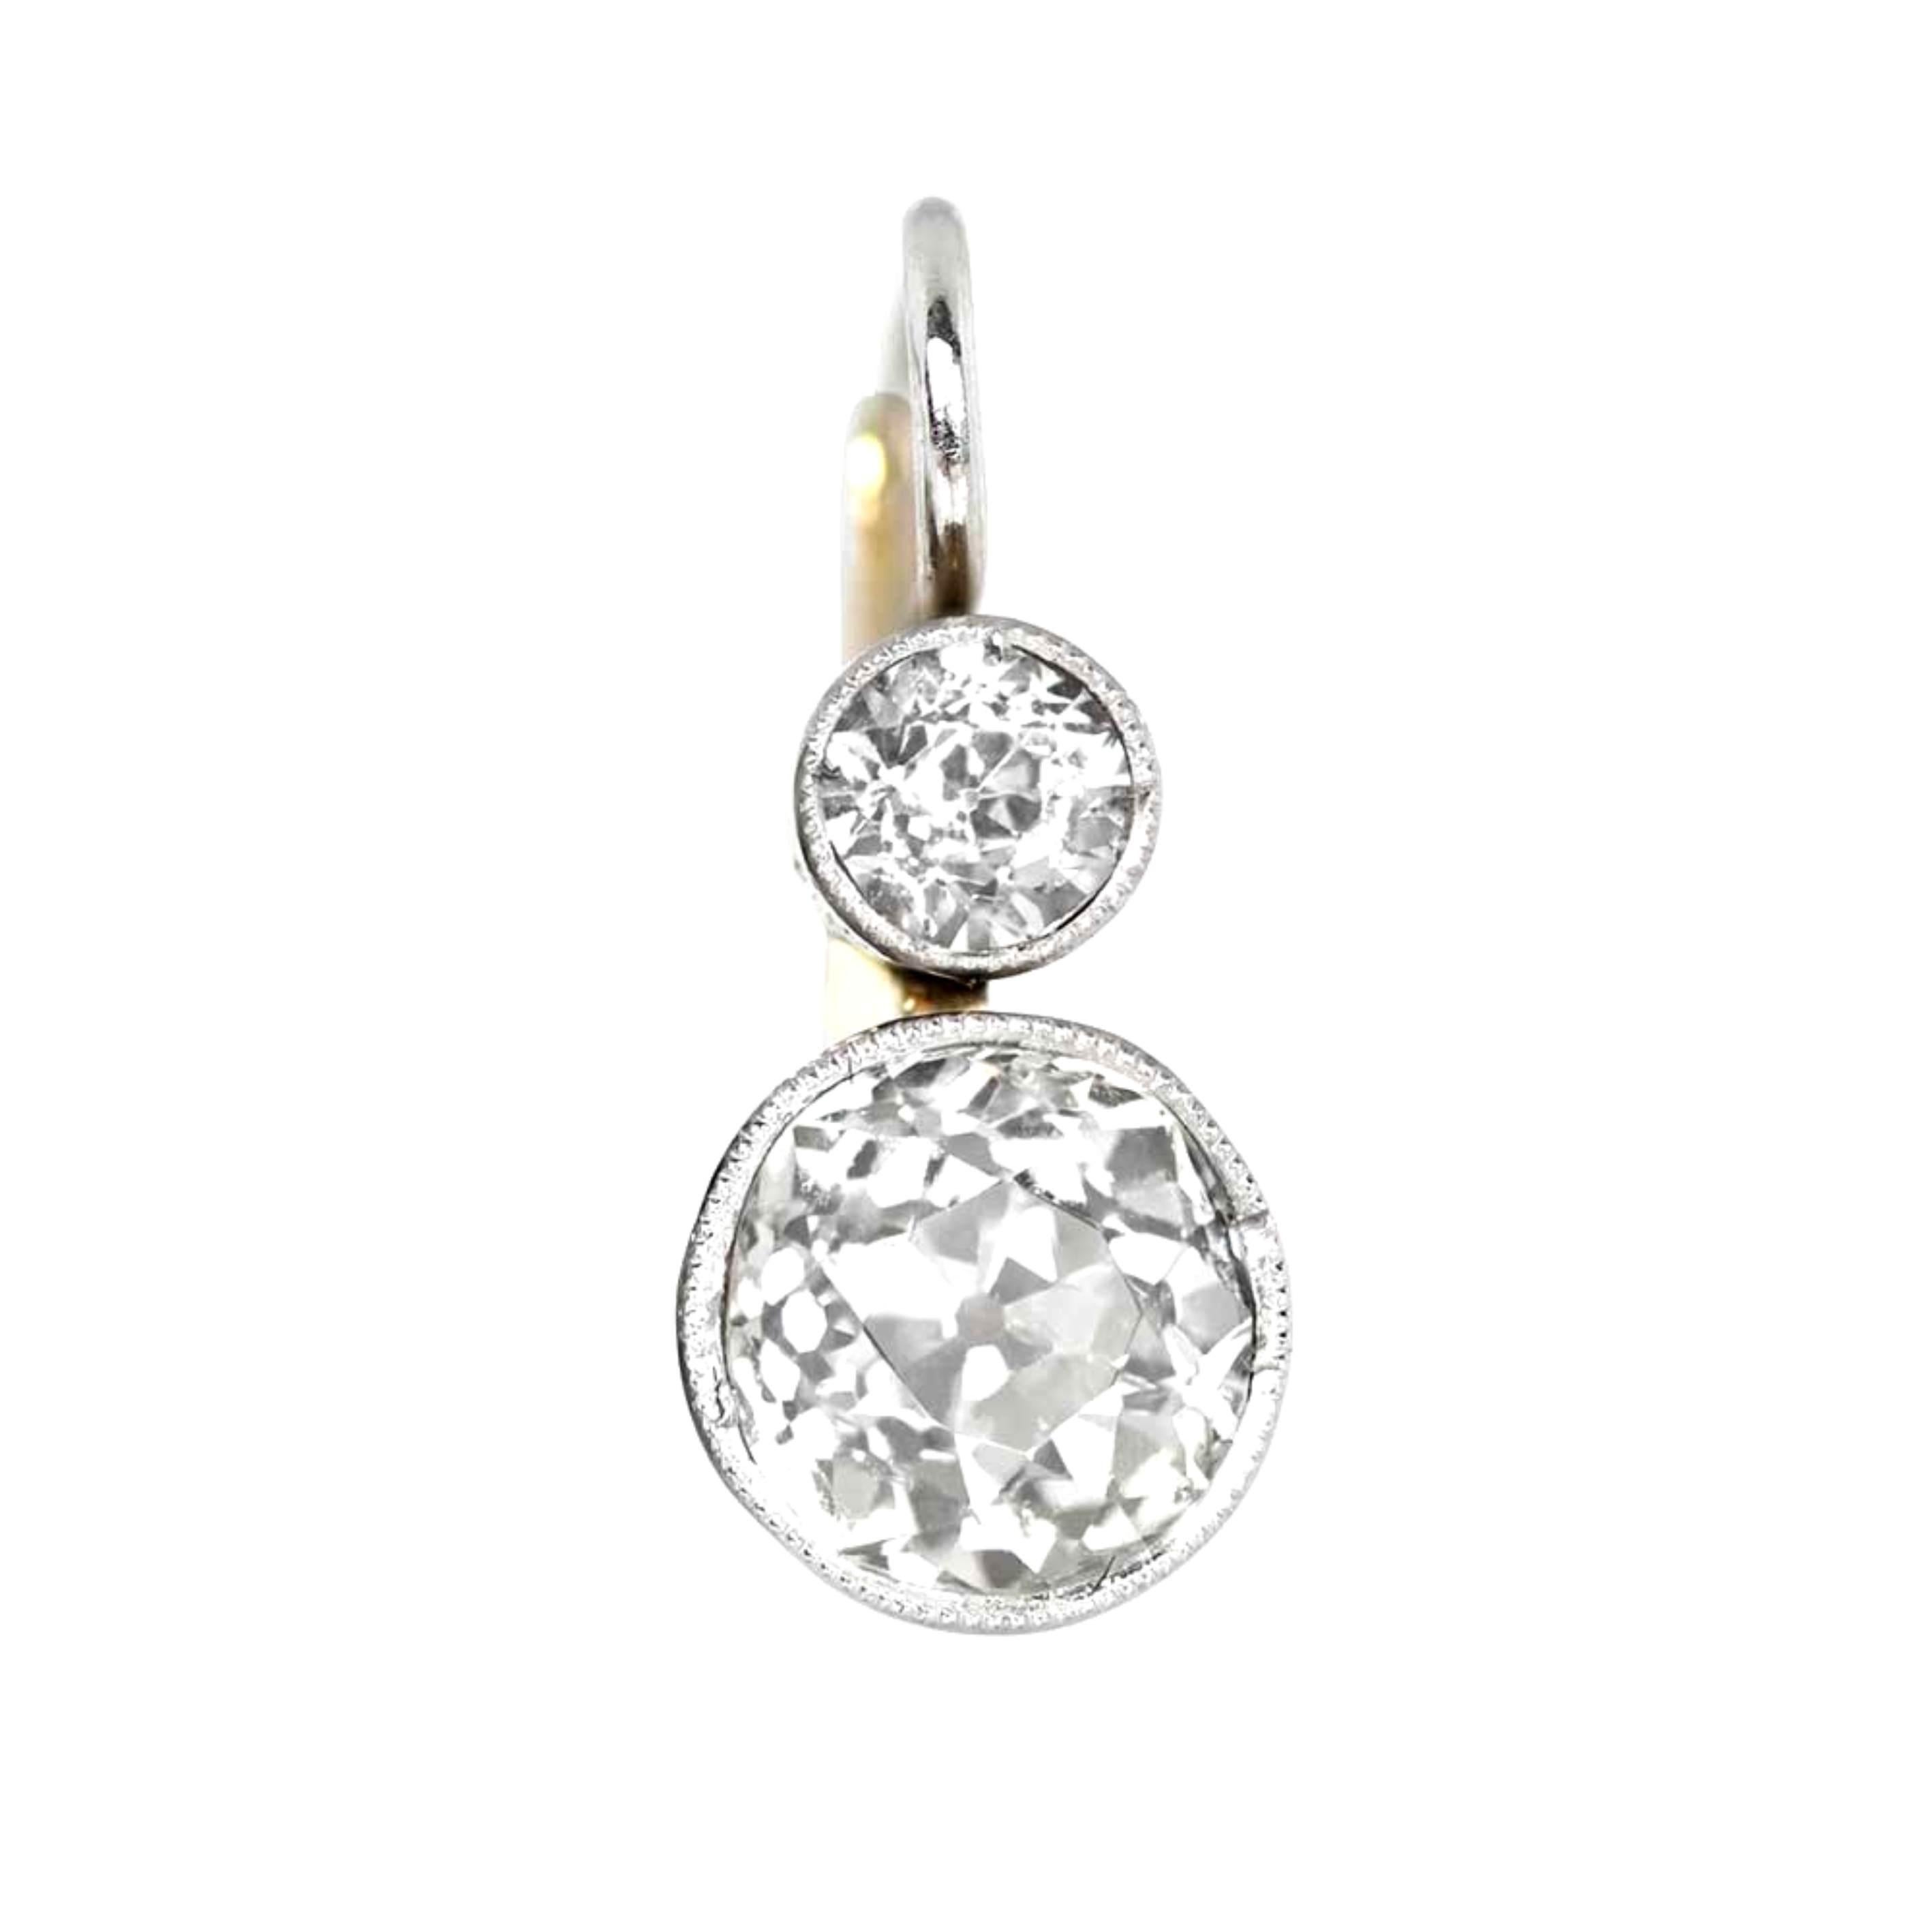 Experience the irresistible charm of these stunning 2.35-carat Old European cut diamond earrings, flawlessly showcased in a luxurious platinum setting on 18k yellow gold. The larger diamonds, with a combined weight of 2.35 carats, are complemented